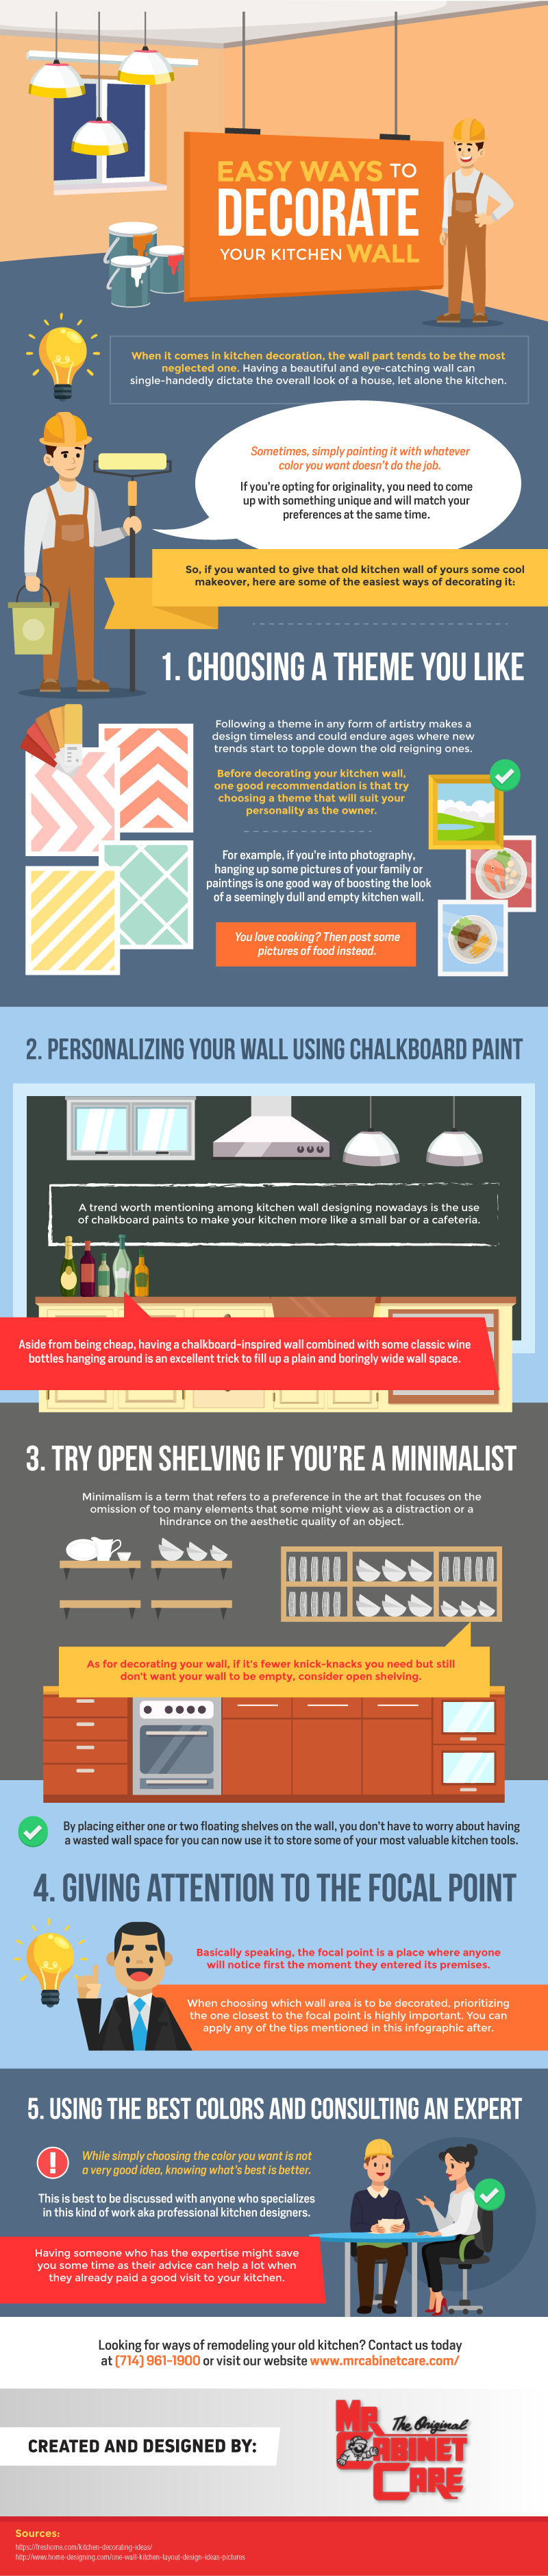 Easy Ways to Decorate Your Kitchen Wall - Infographic